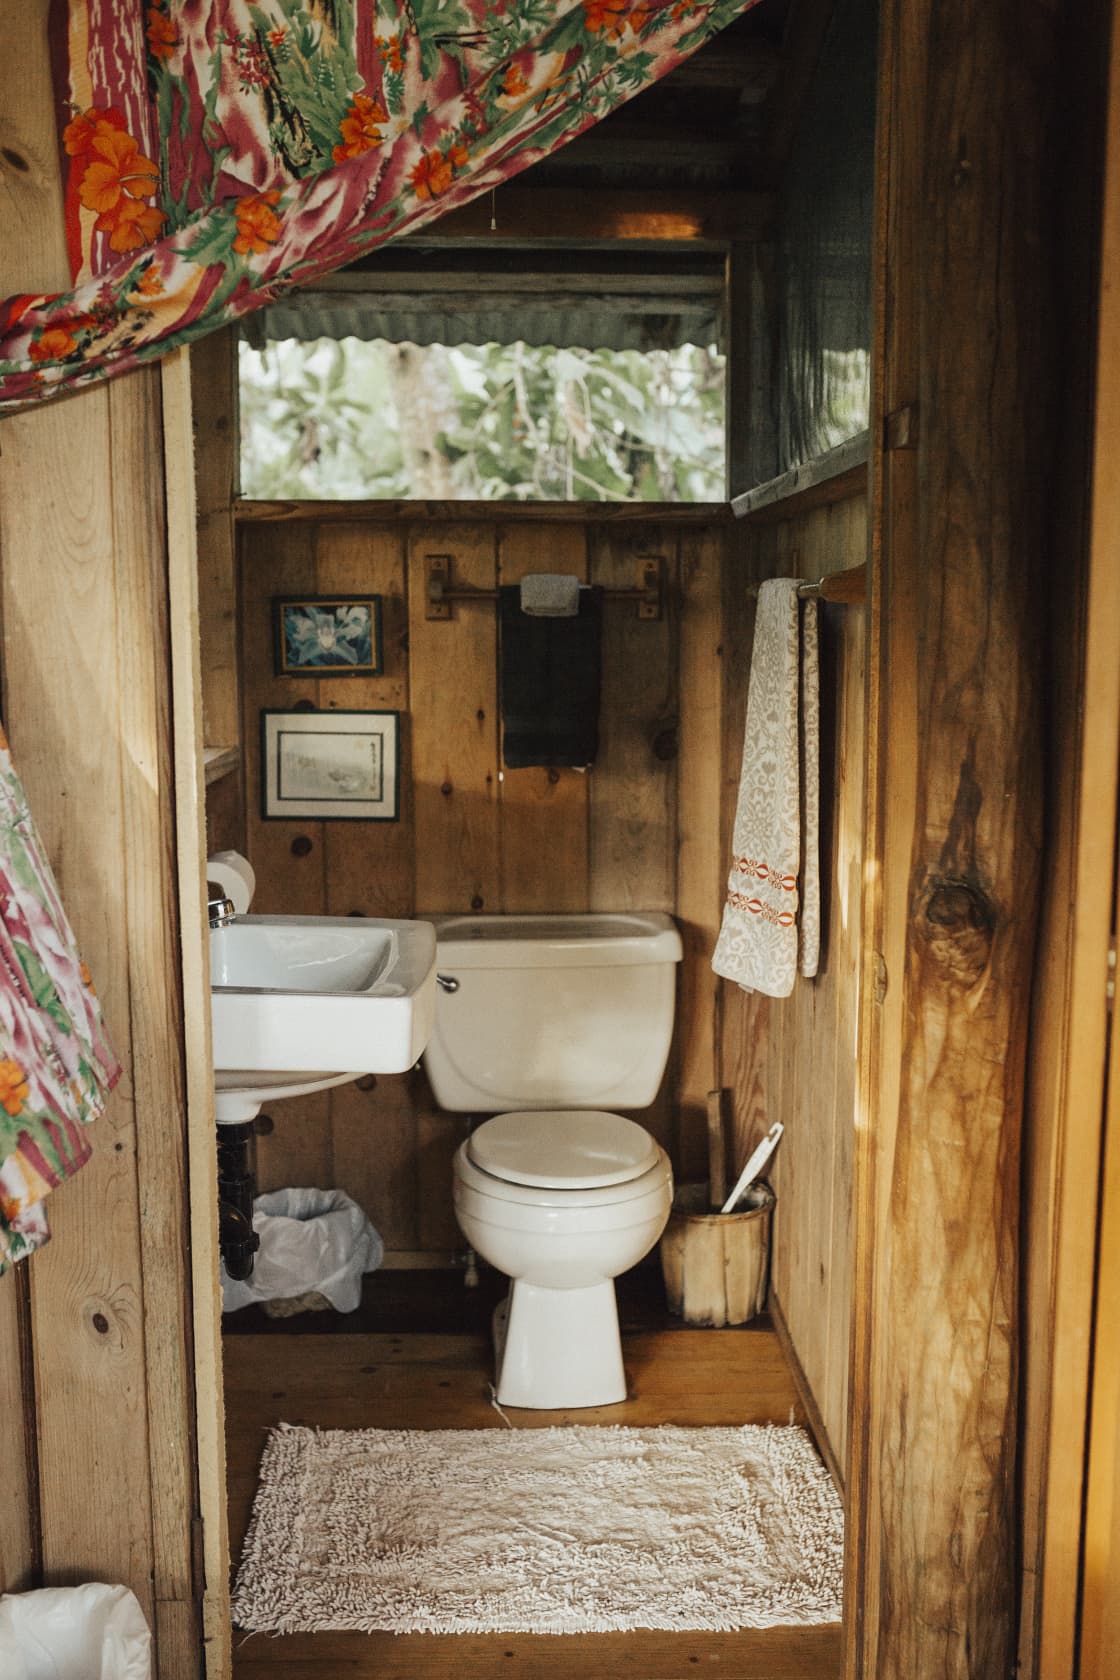 Bathroom in the cottage.